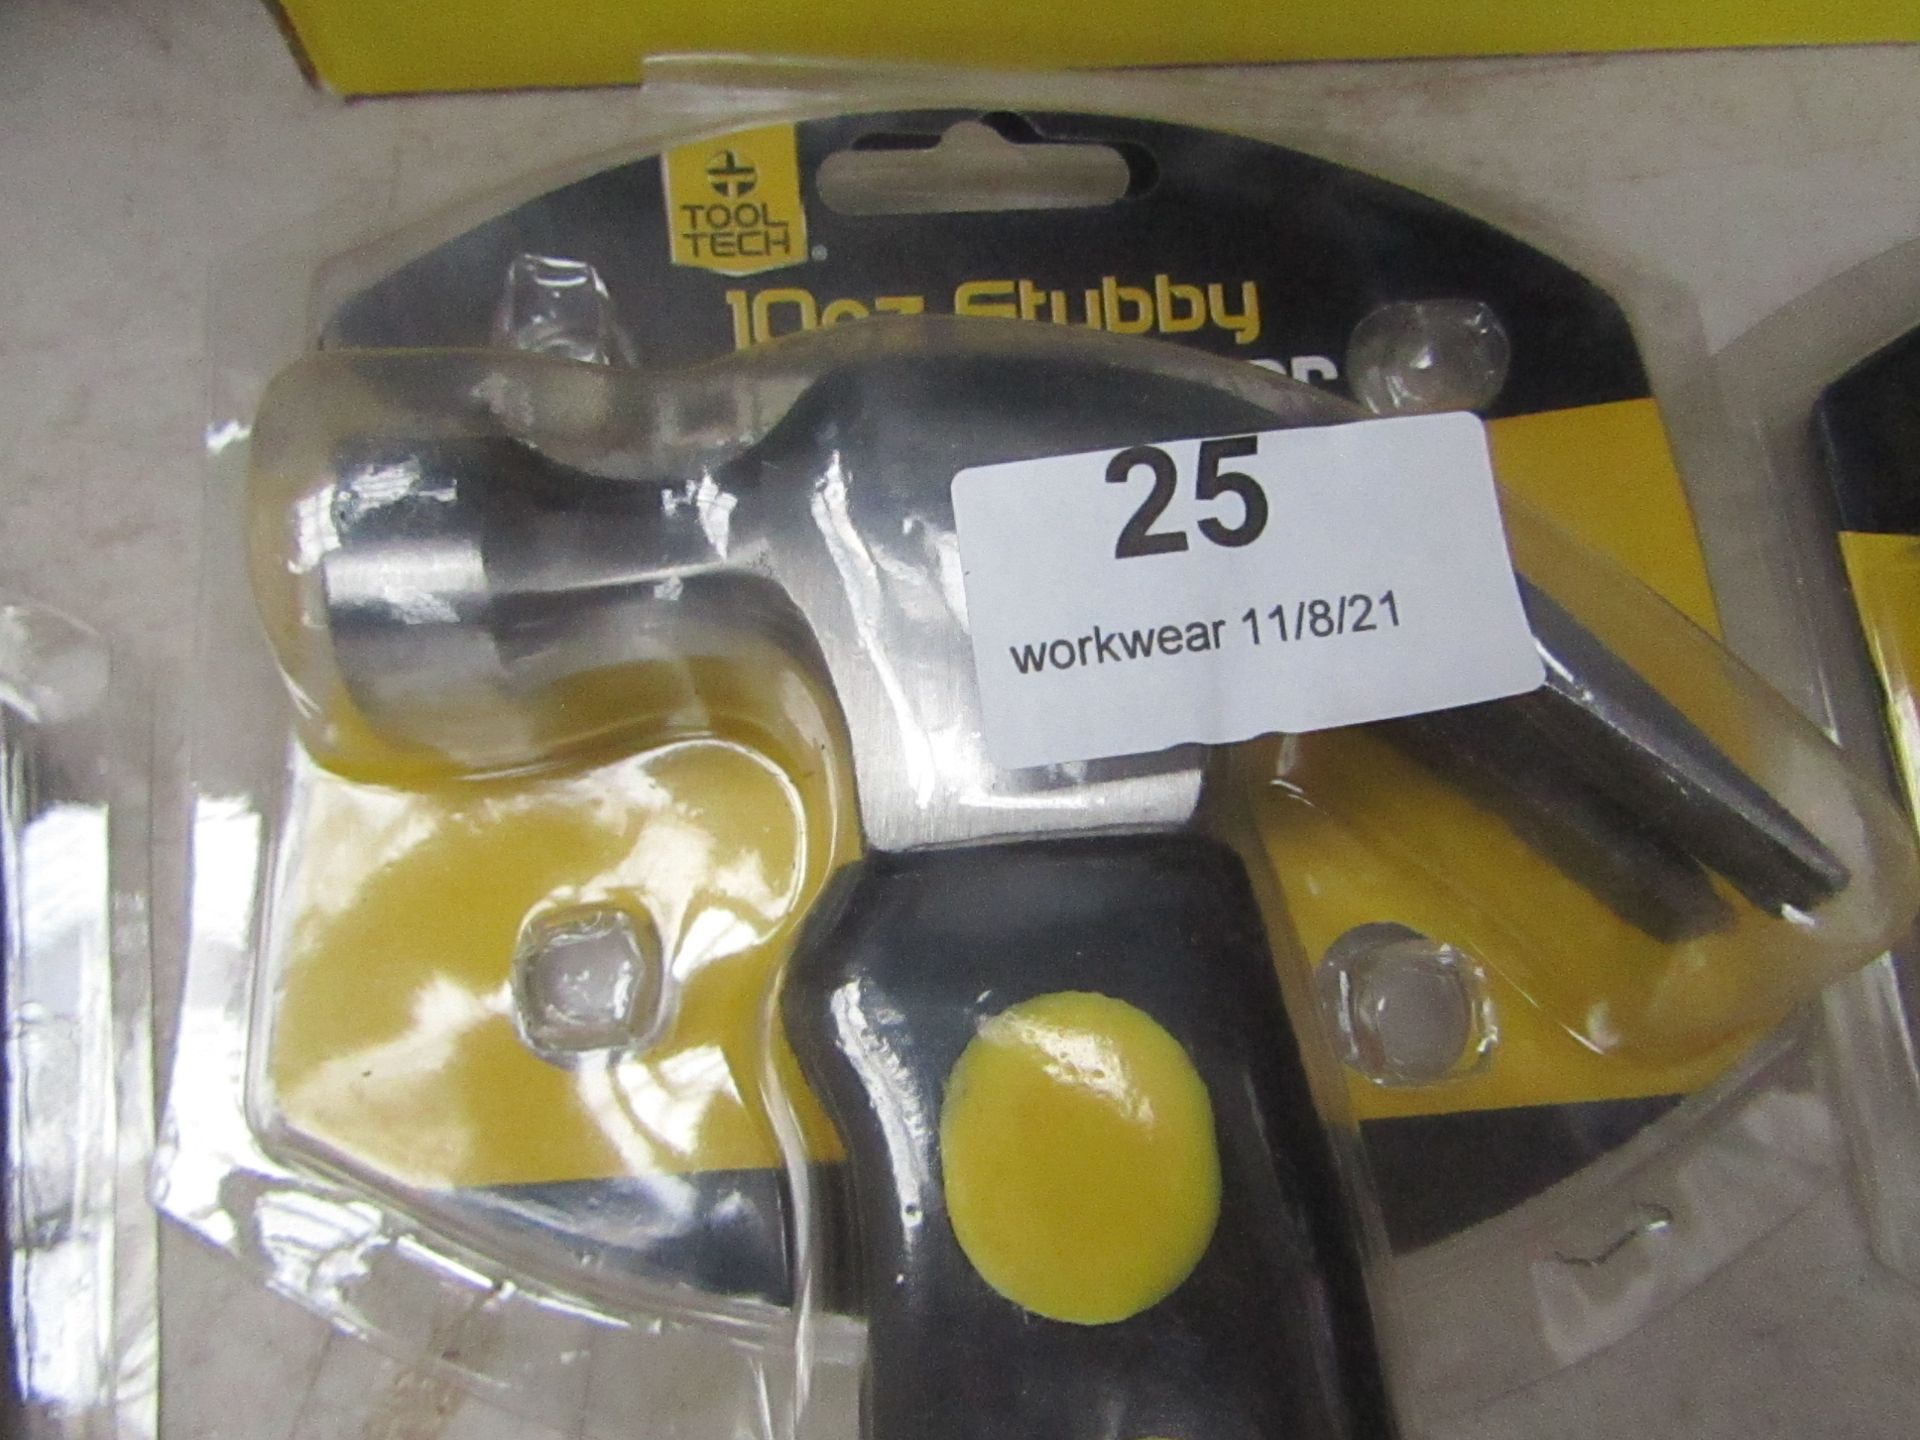 Tooltech - 10oz Stubby Claw Hammer - New & Packaged.